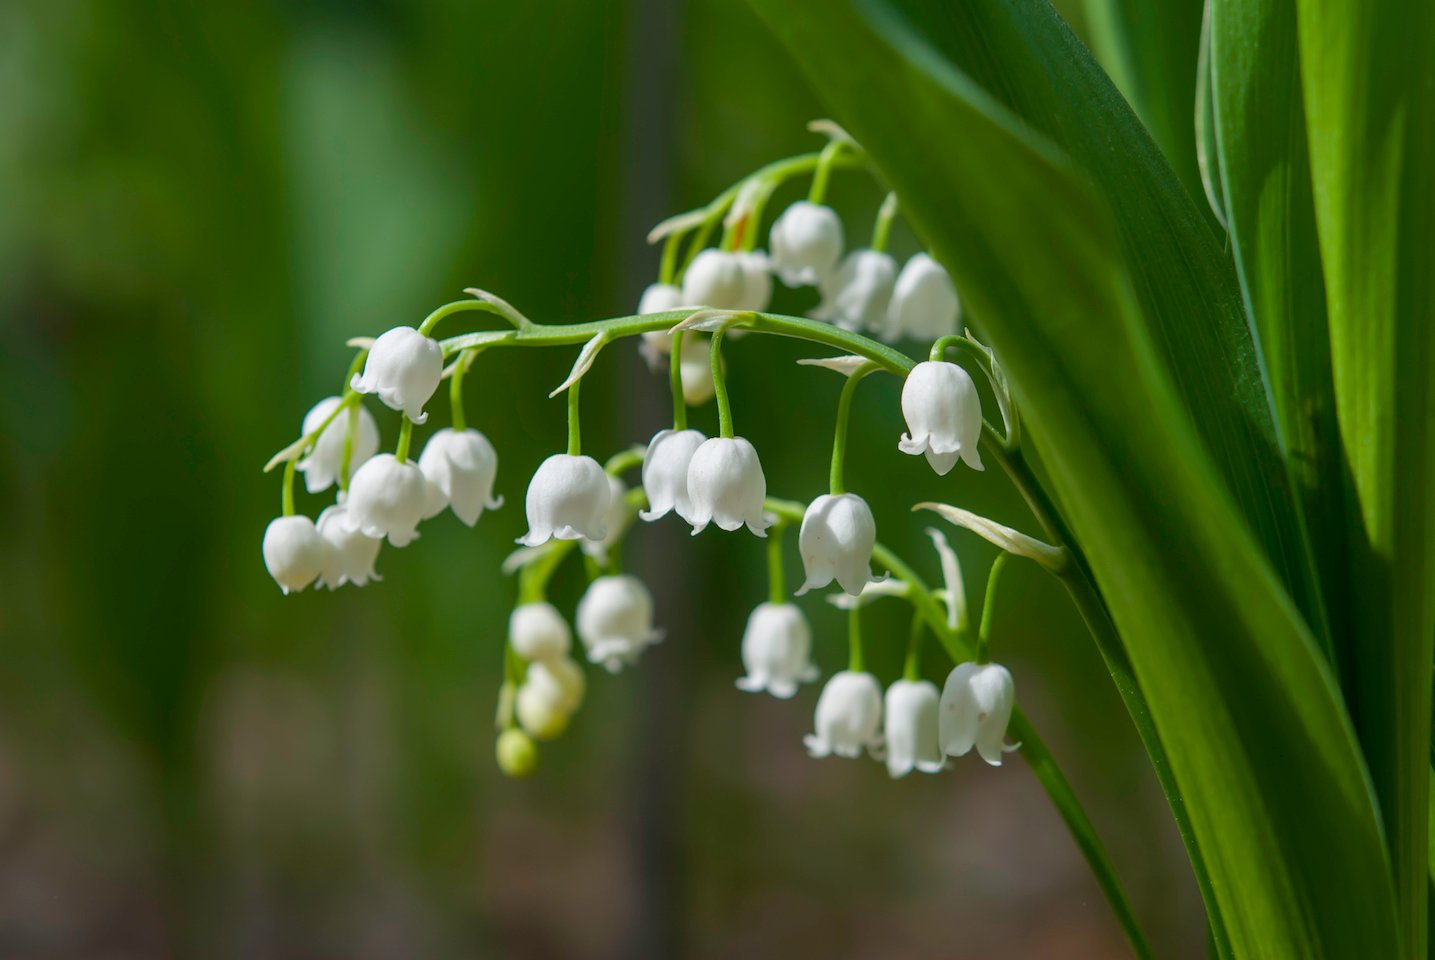 White Lily of the valley hanging from a green leafy plant.